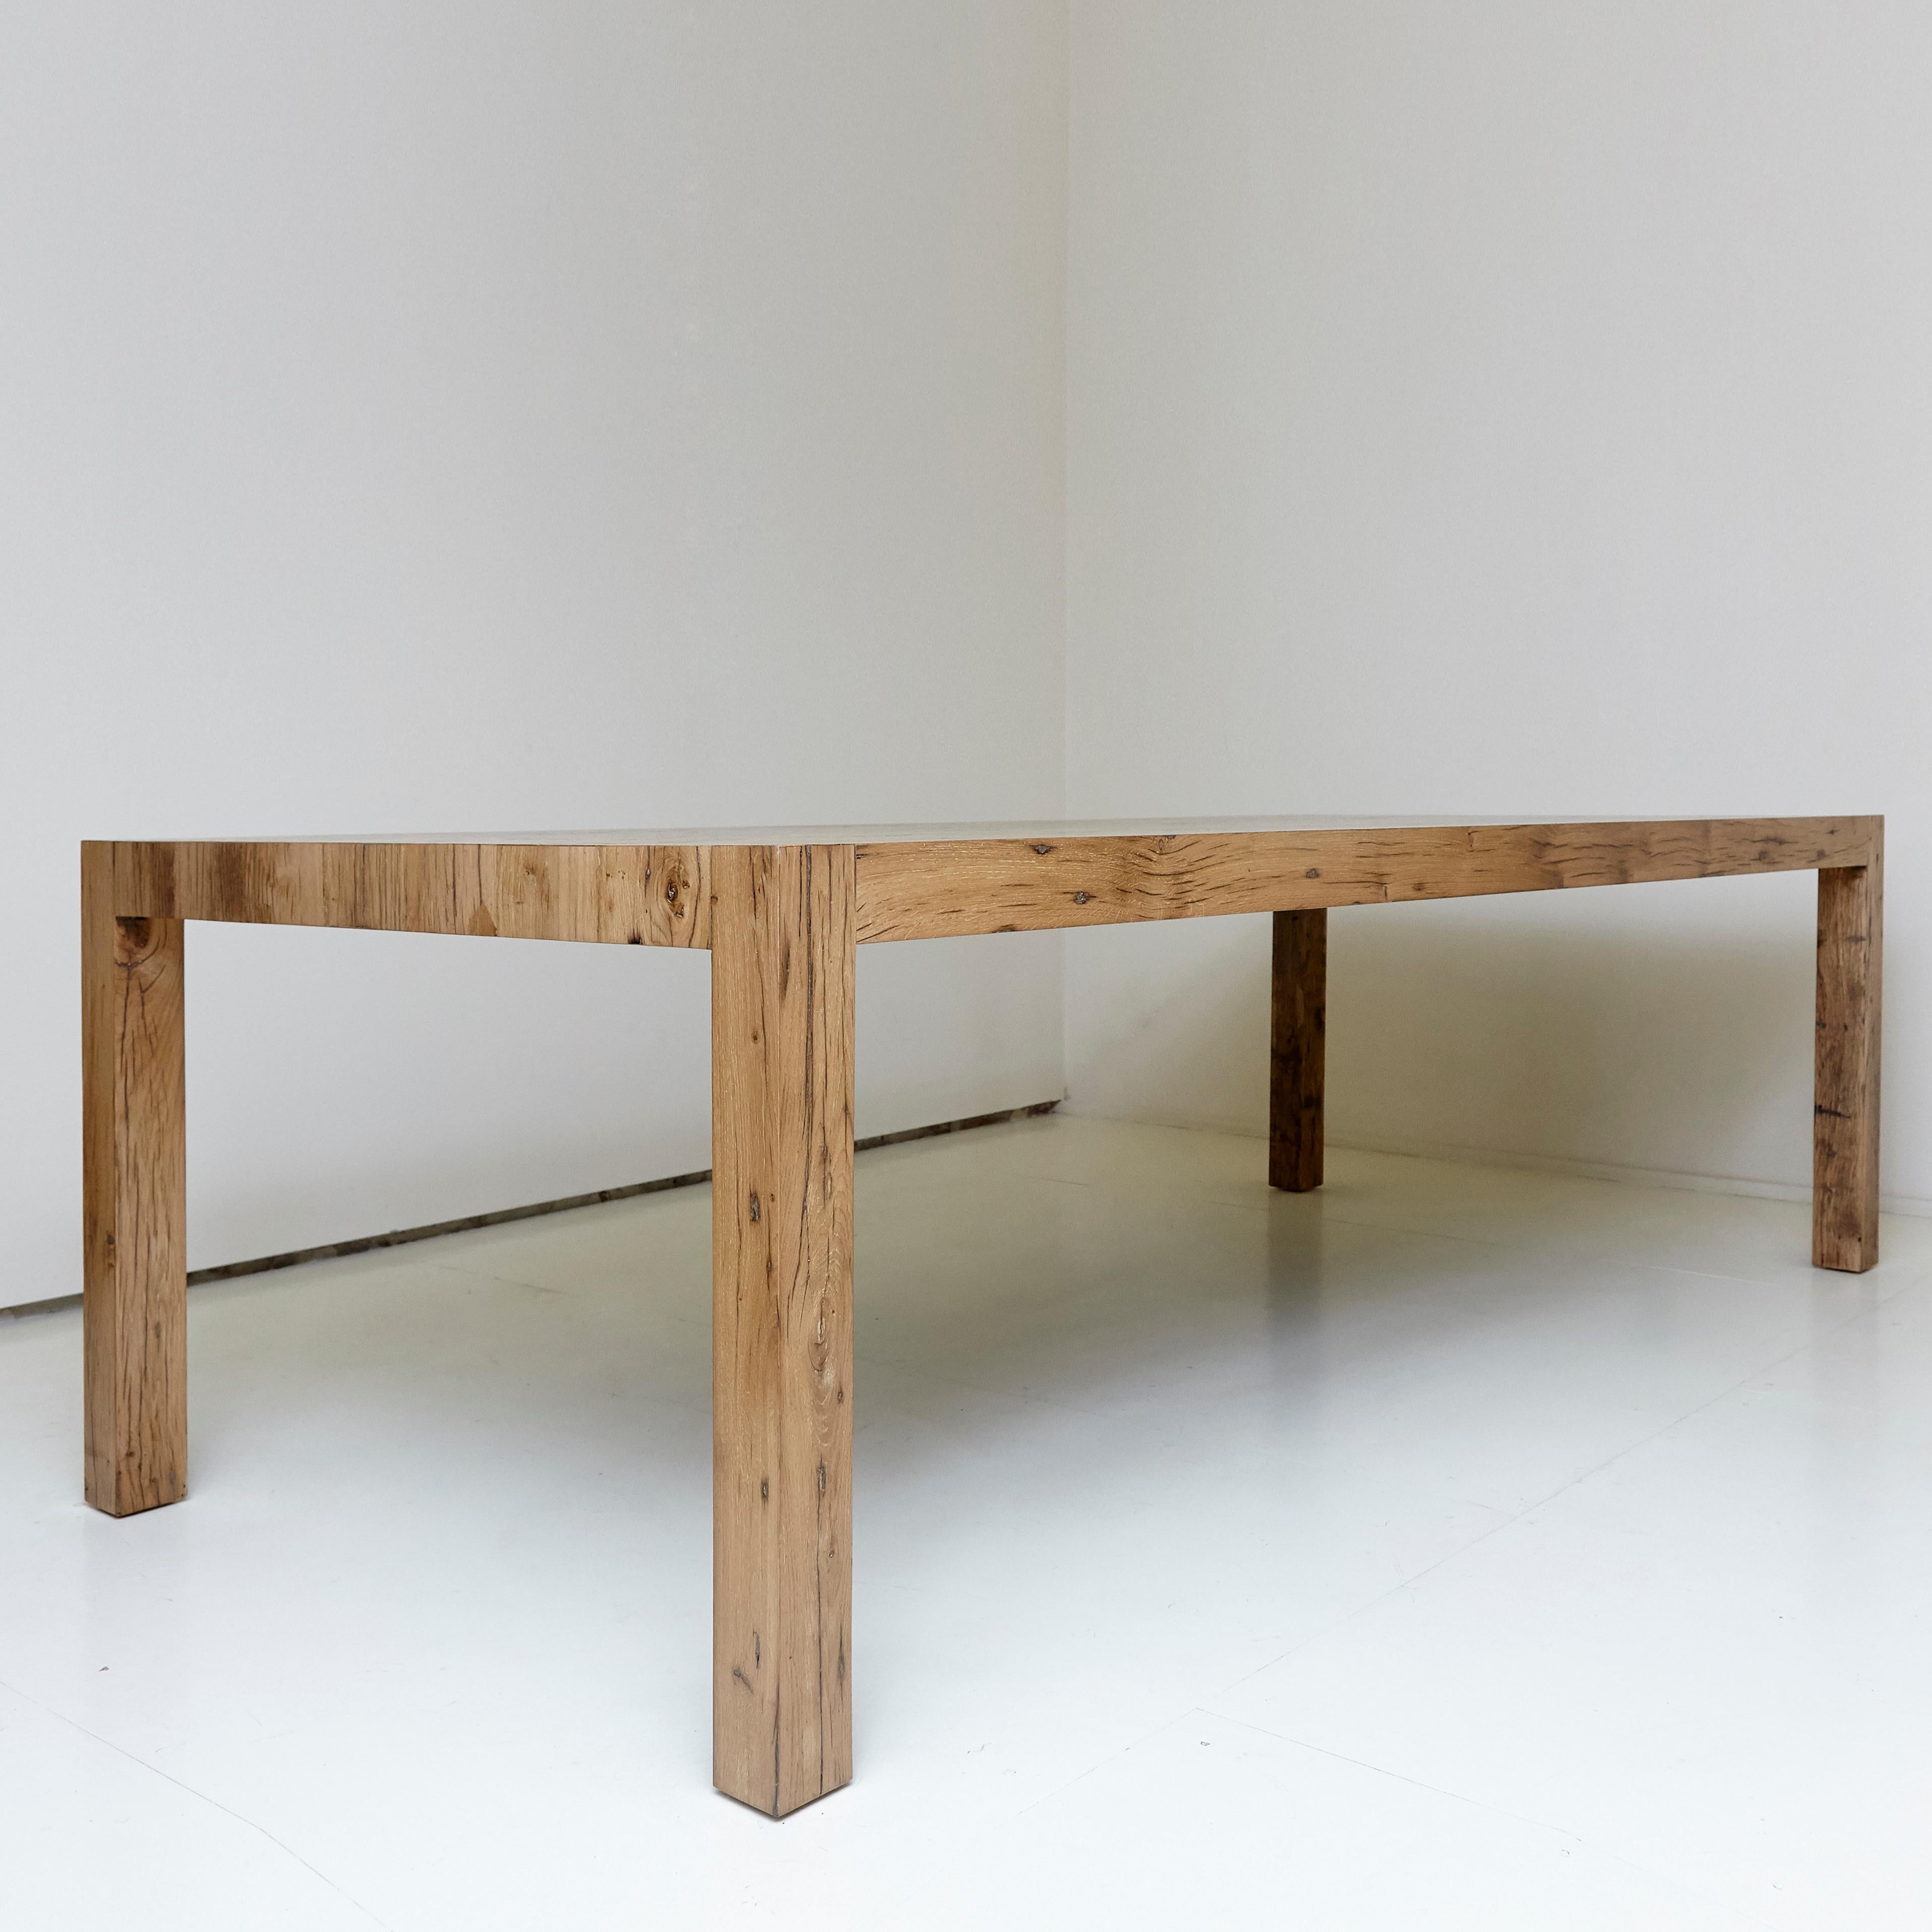 Contemporary Mid-Century Modern Style Recovered Oak Big Table